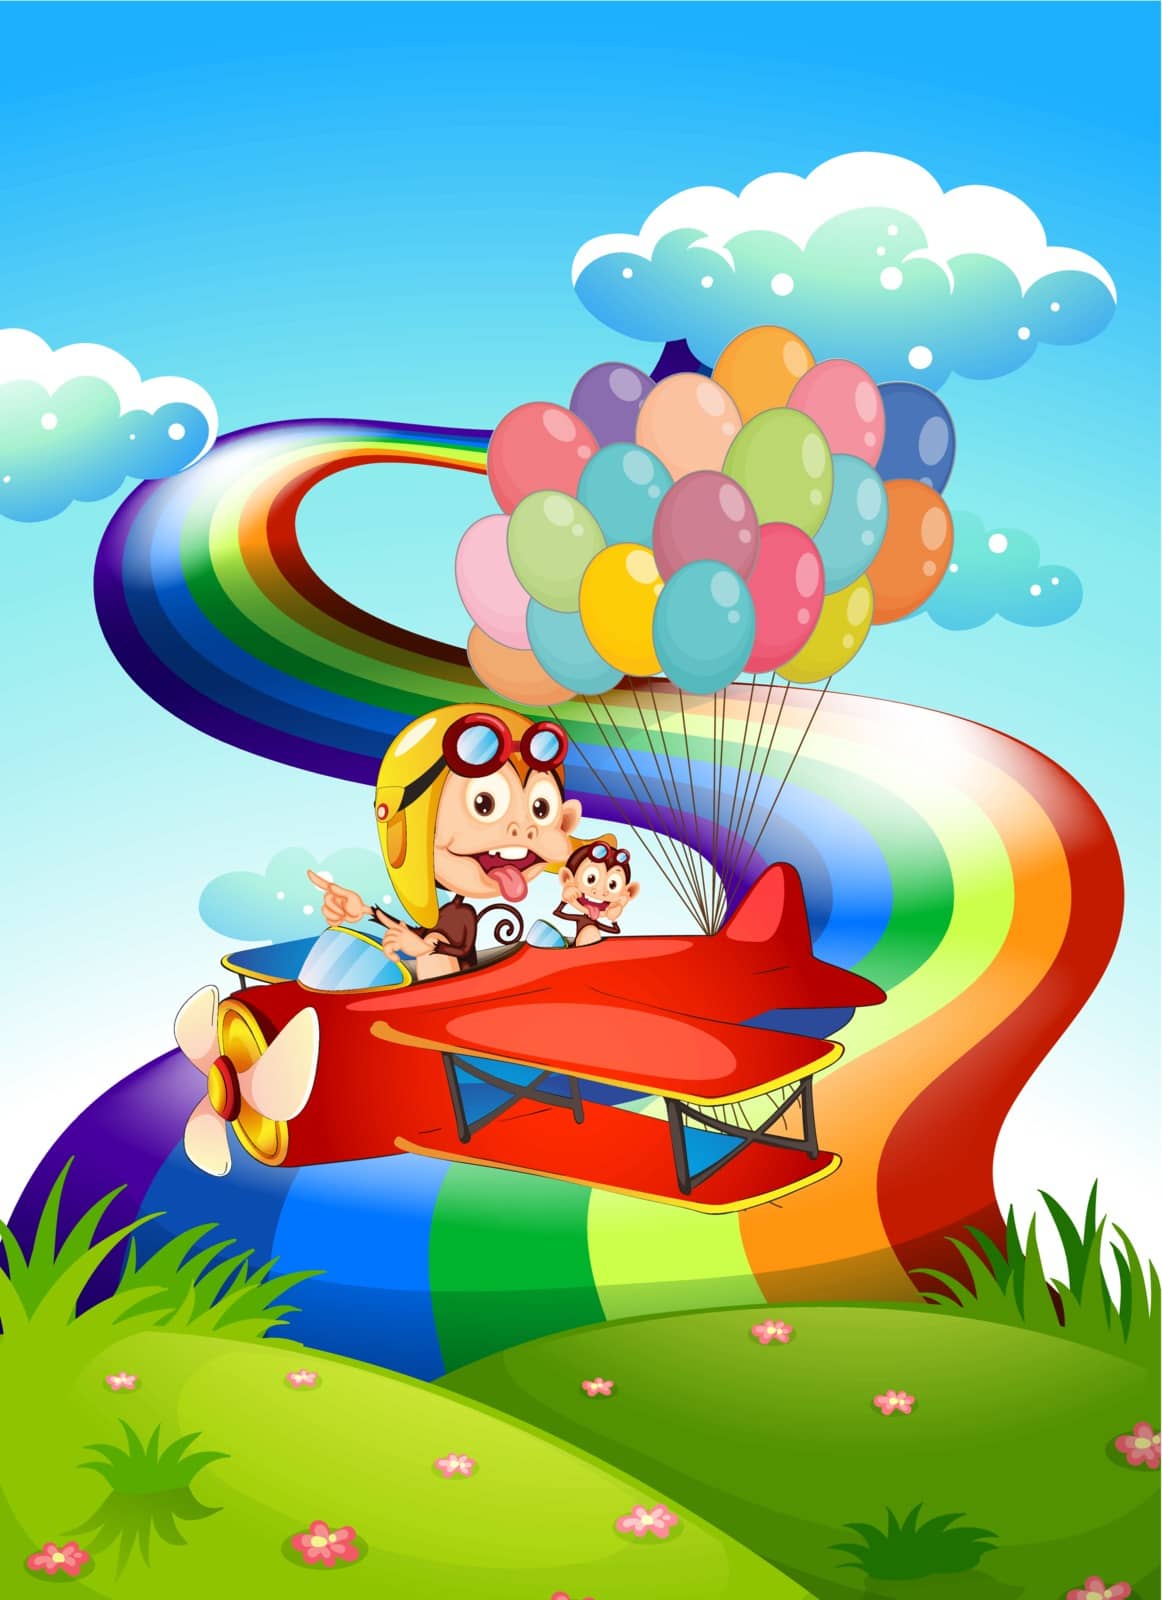 Playful monkeys on a plane with balloons by iimages